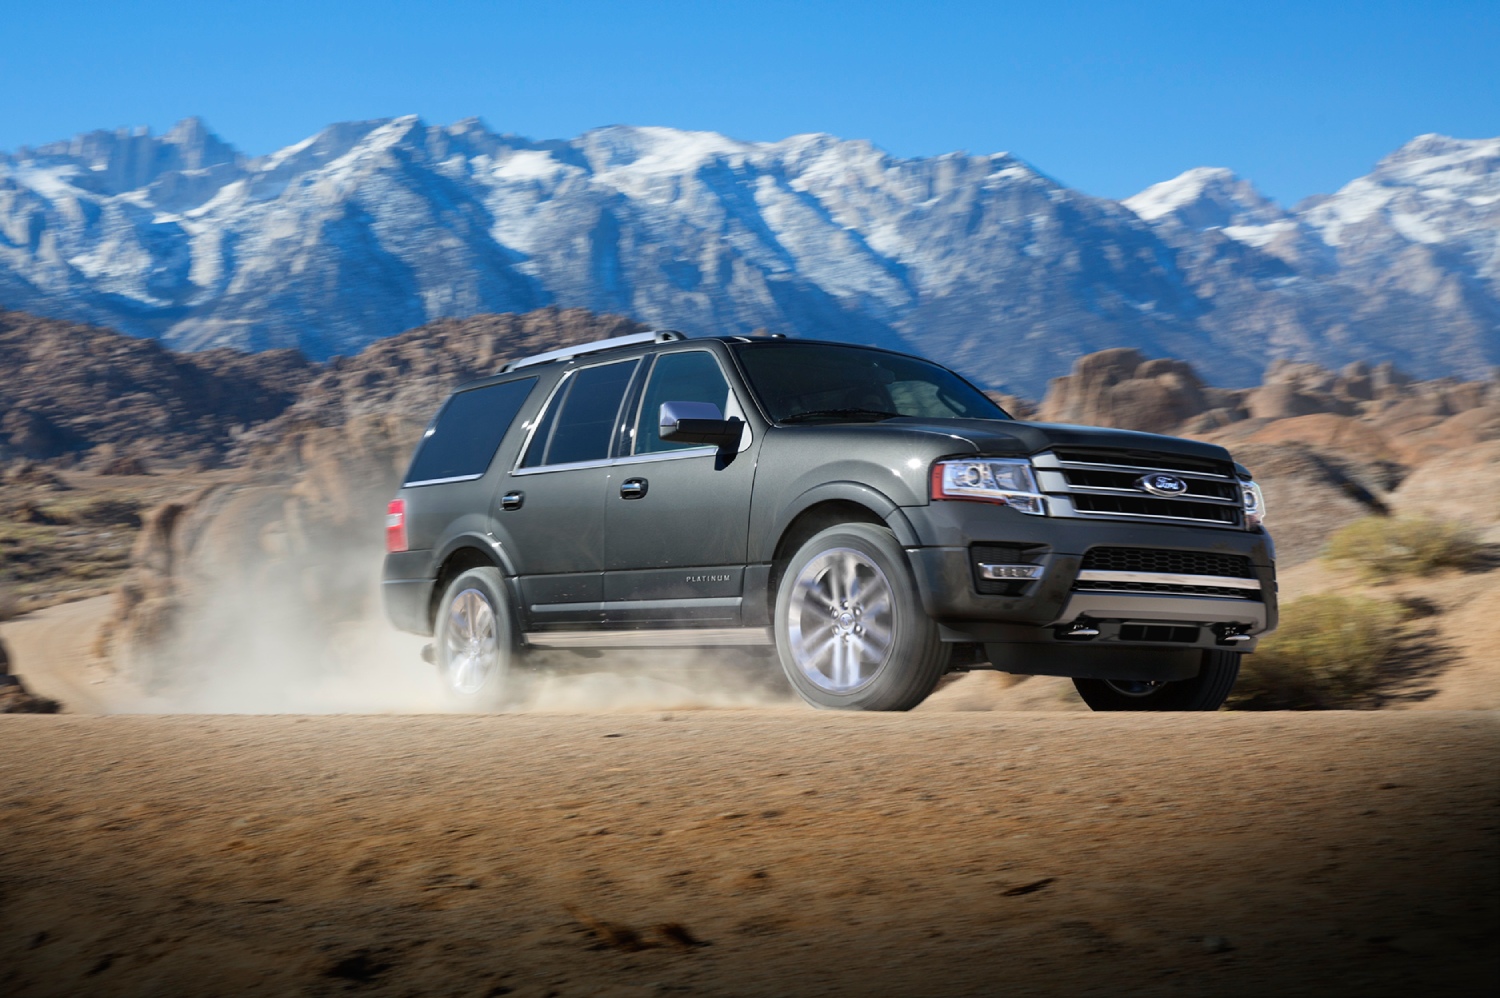 Affordable large SUVs from 2017 like this Ford Expedition